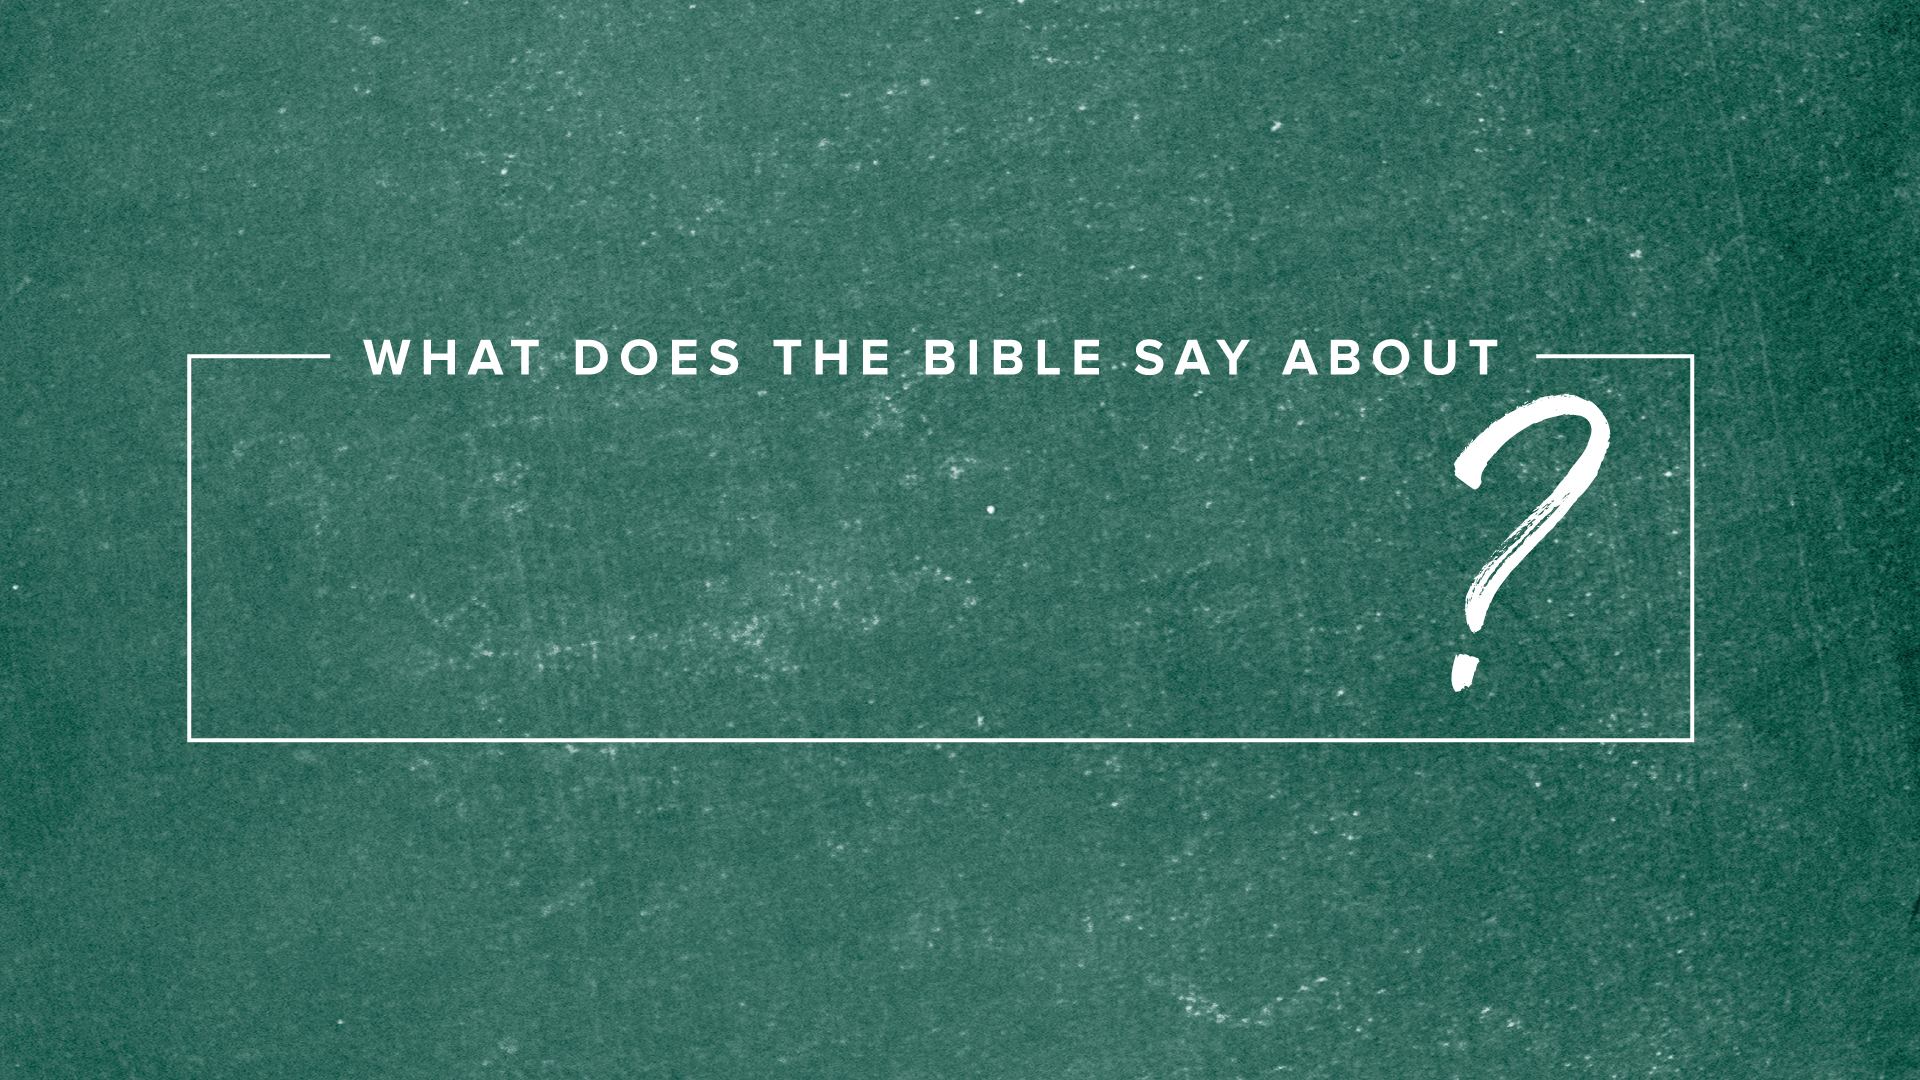 What Does The Bible Say About ___? Sex